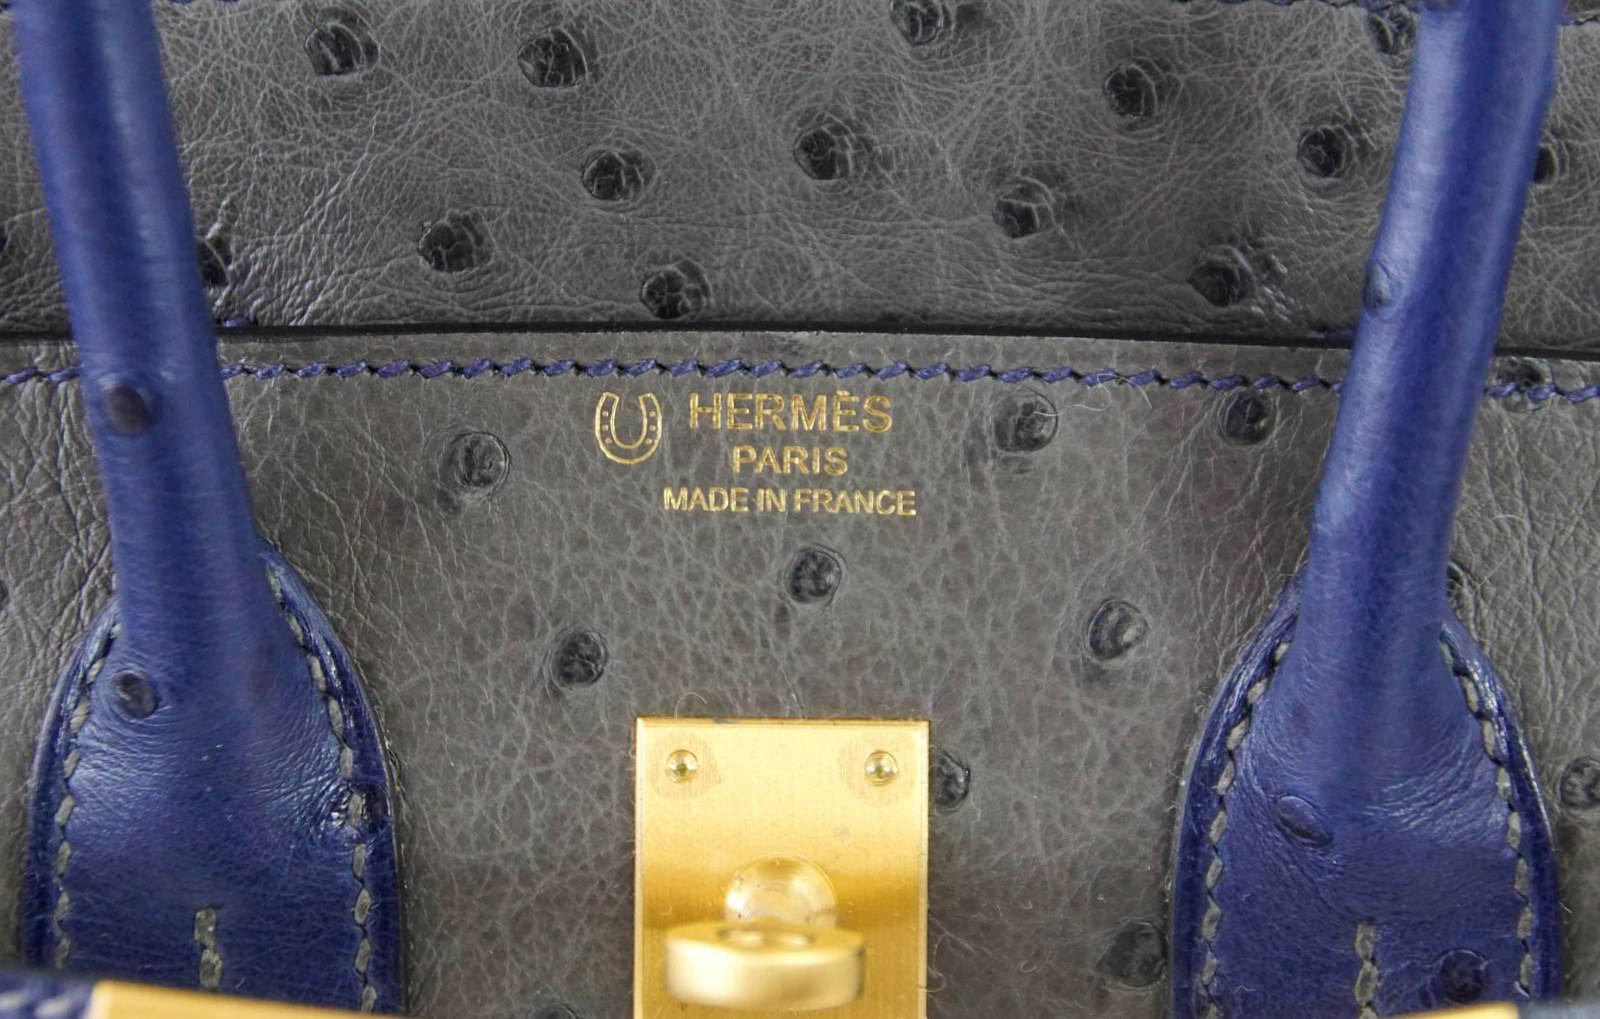 Guaranteed authentic Hermes Birkin 25 beautiful Gris Agate Ostrich Horseshoe with exquisite and subtle coloration with Blue Iris.
Lush with brushed gold hardware.
Comes with lock, keys, clochette, sleepers, raincoat and signature Hermes box.
NEW or